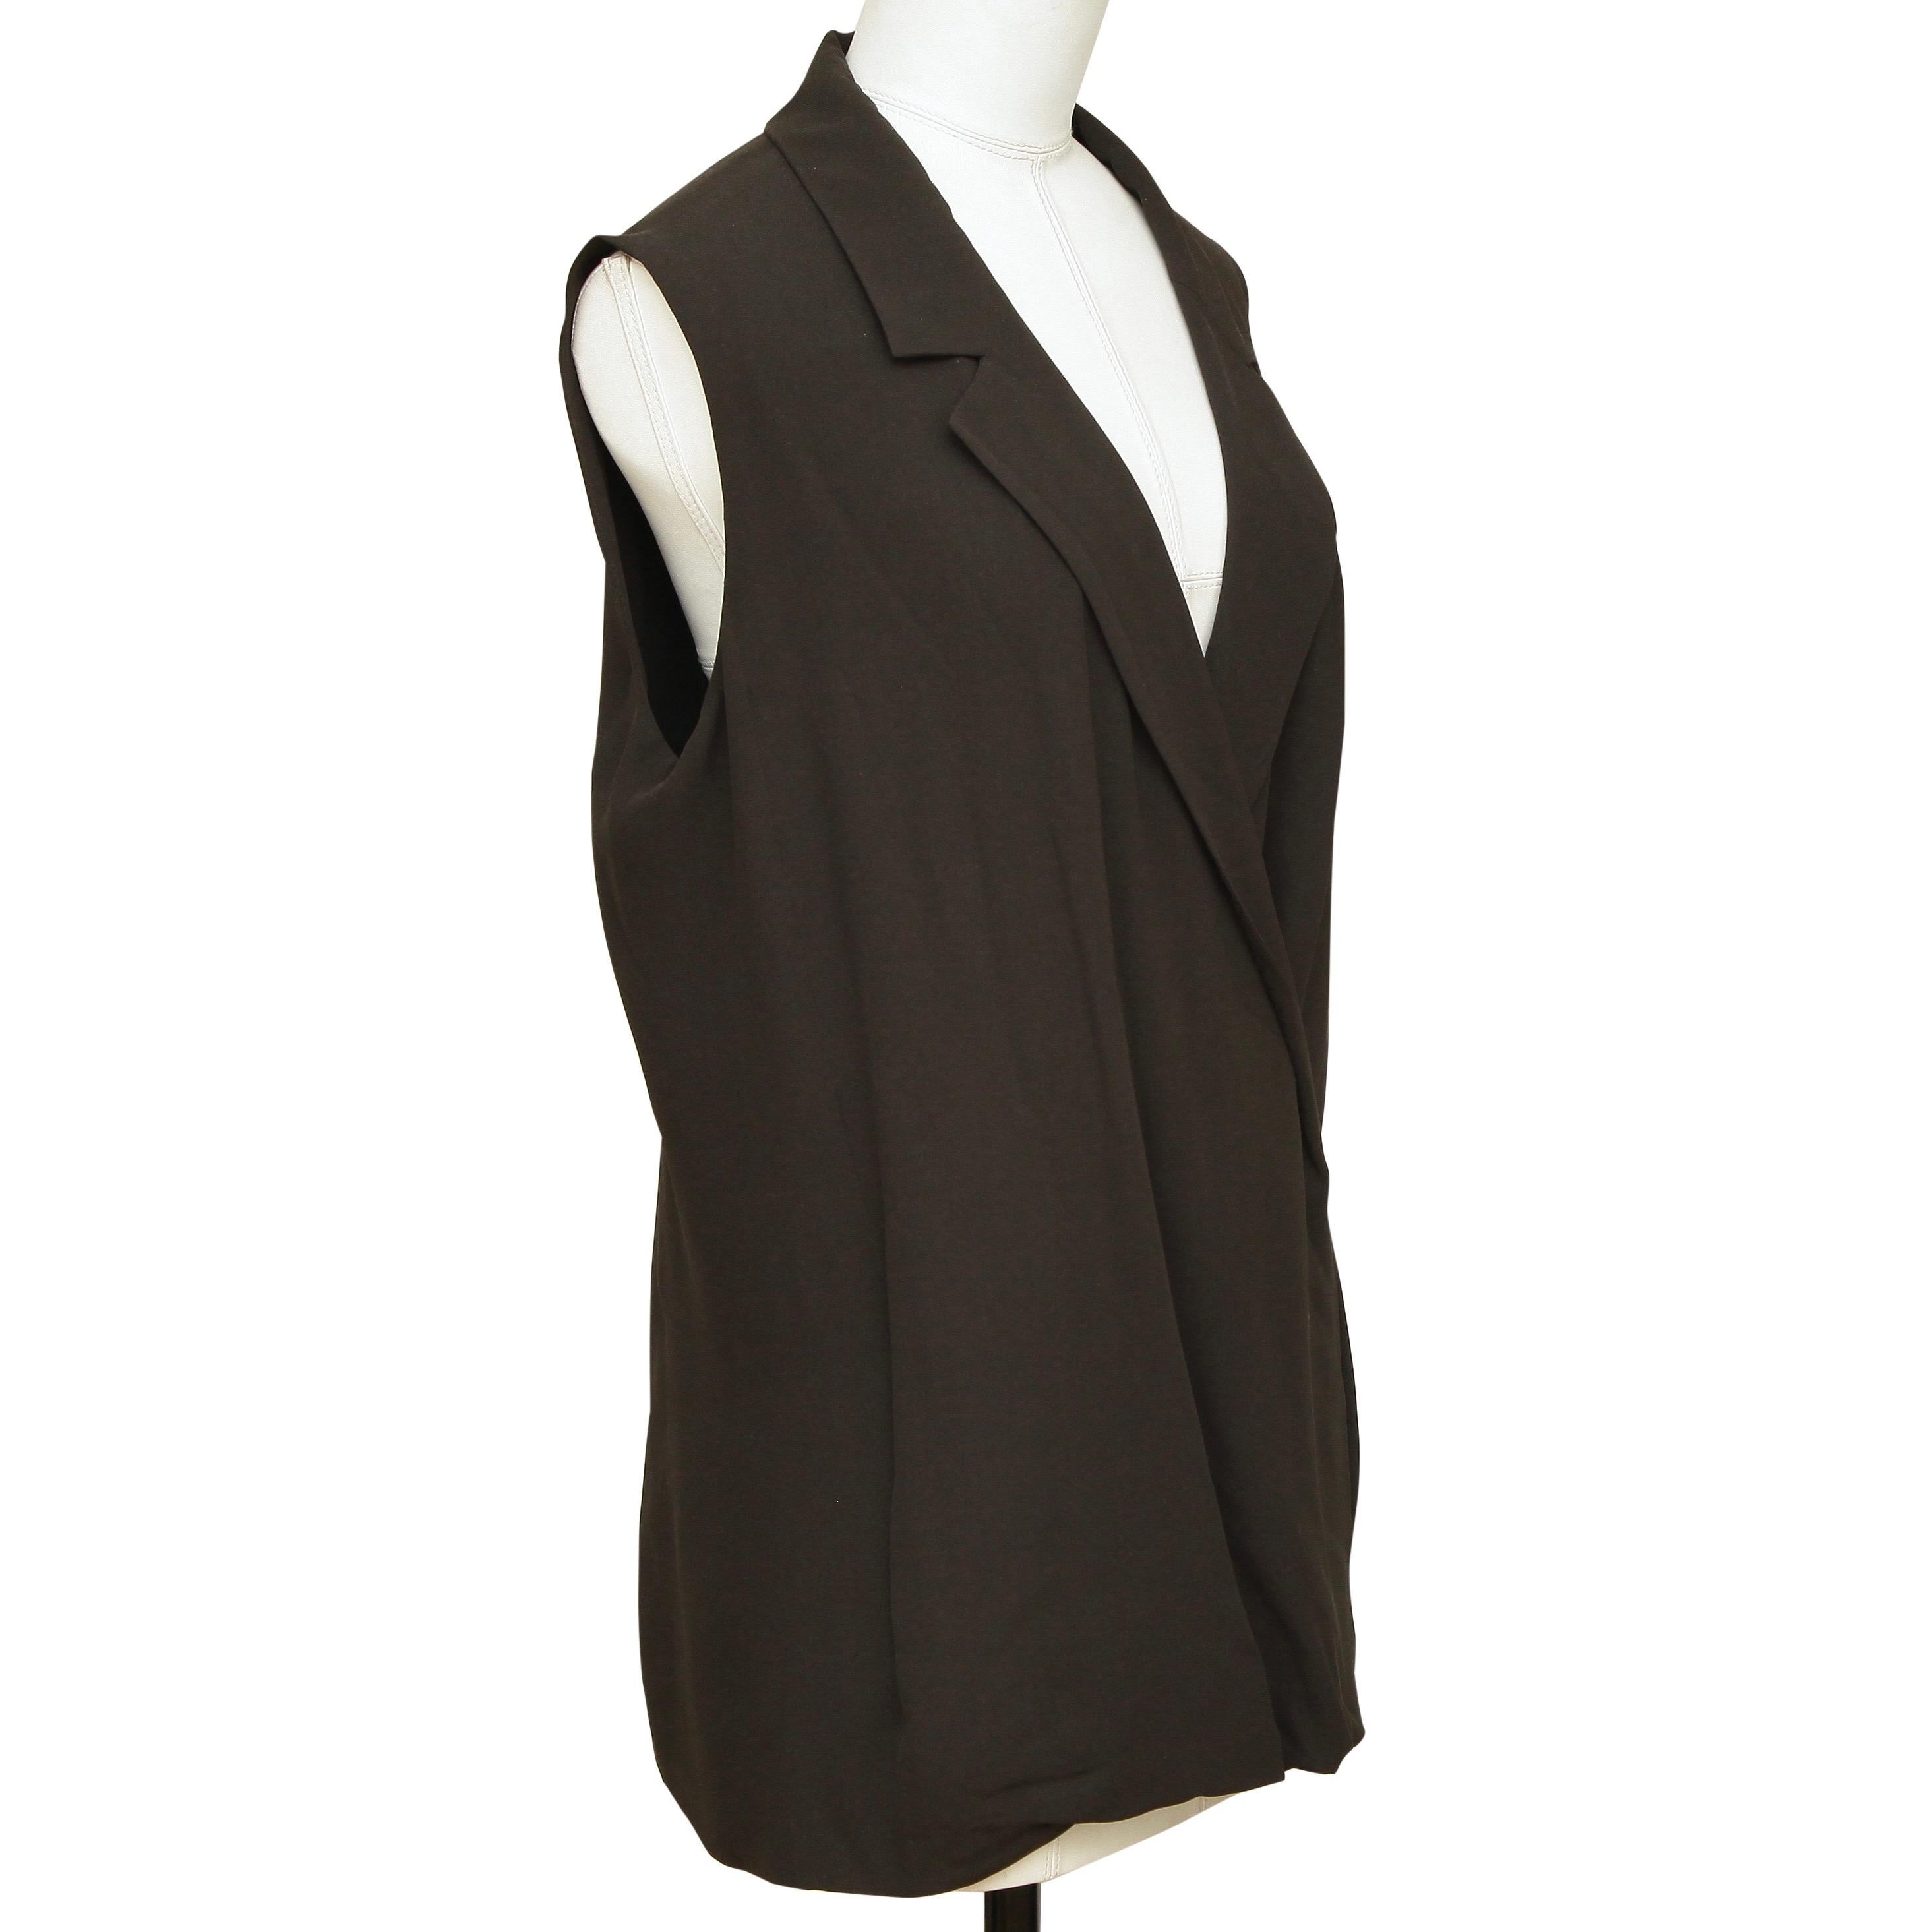 GUARANTEED AUTHENTIC VINTAGE HERMES BLACK SILK BLOUSE

Design:
- Sleeveless black silk blouse.
- V-neck pointed collar.
- Faux wrap front.
- Slip on.

Material: 100% Silk

Size: 40

Measurements (Approximate laid flat):
- Underarm to Underarm,